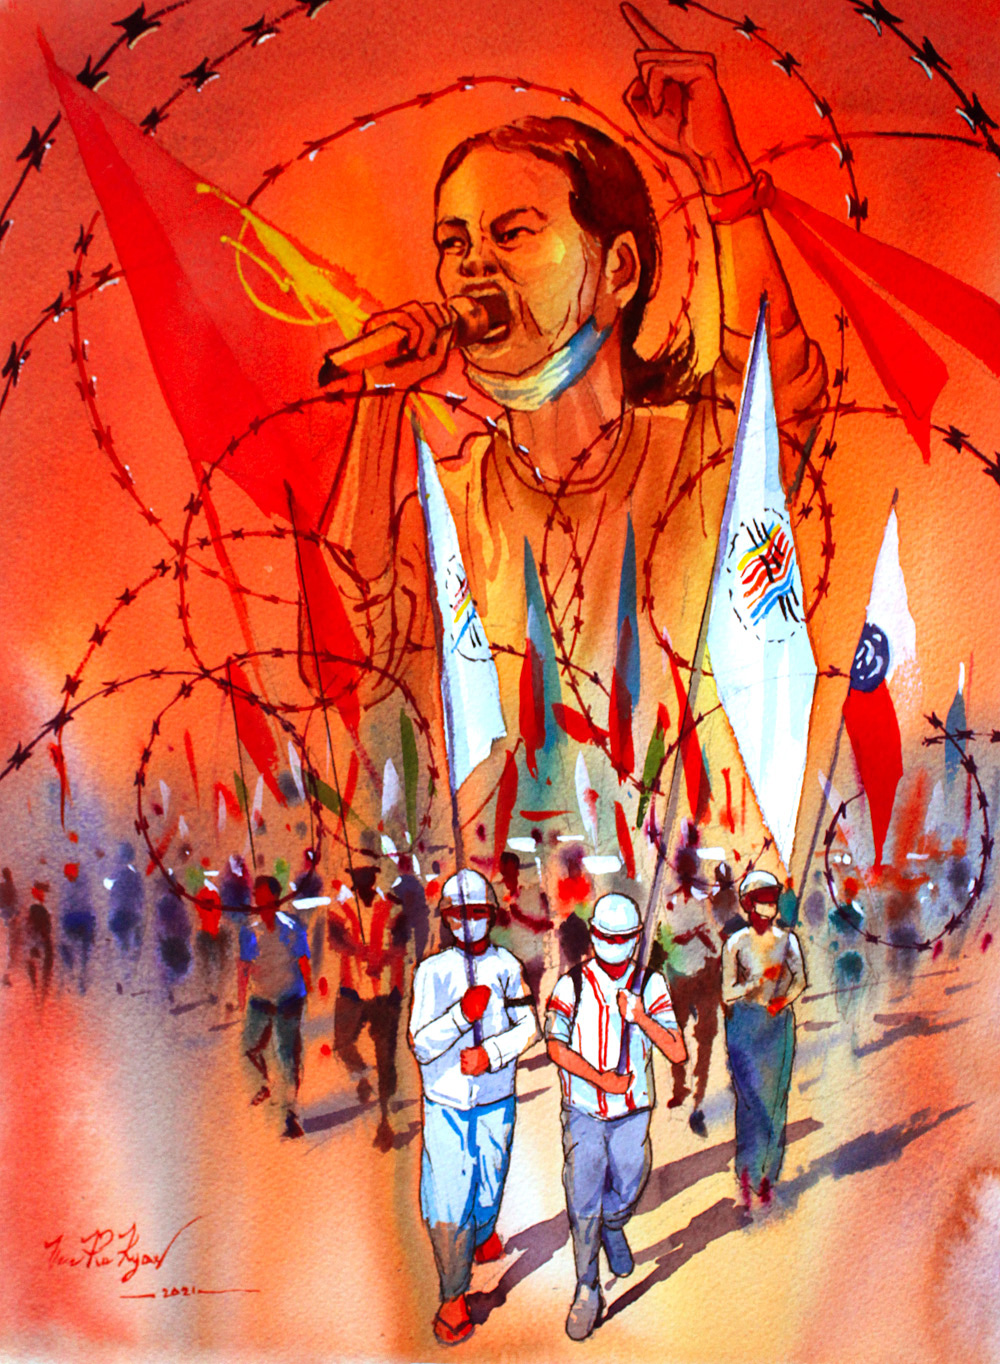 A painting of protestors marching with flags on the street. Coils of barbed wire are overlaid on them, and at the top a speaker with a microphone rallies the crowd.